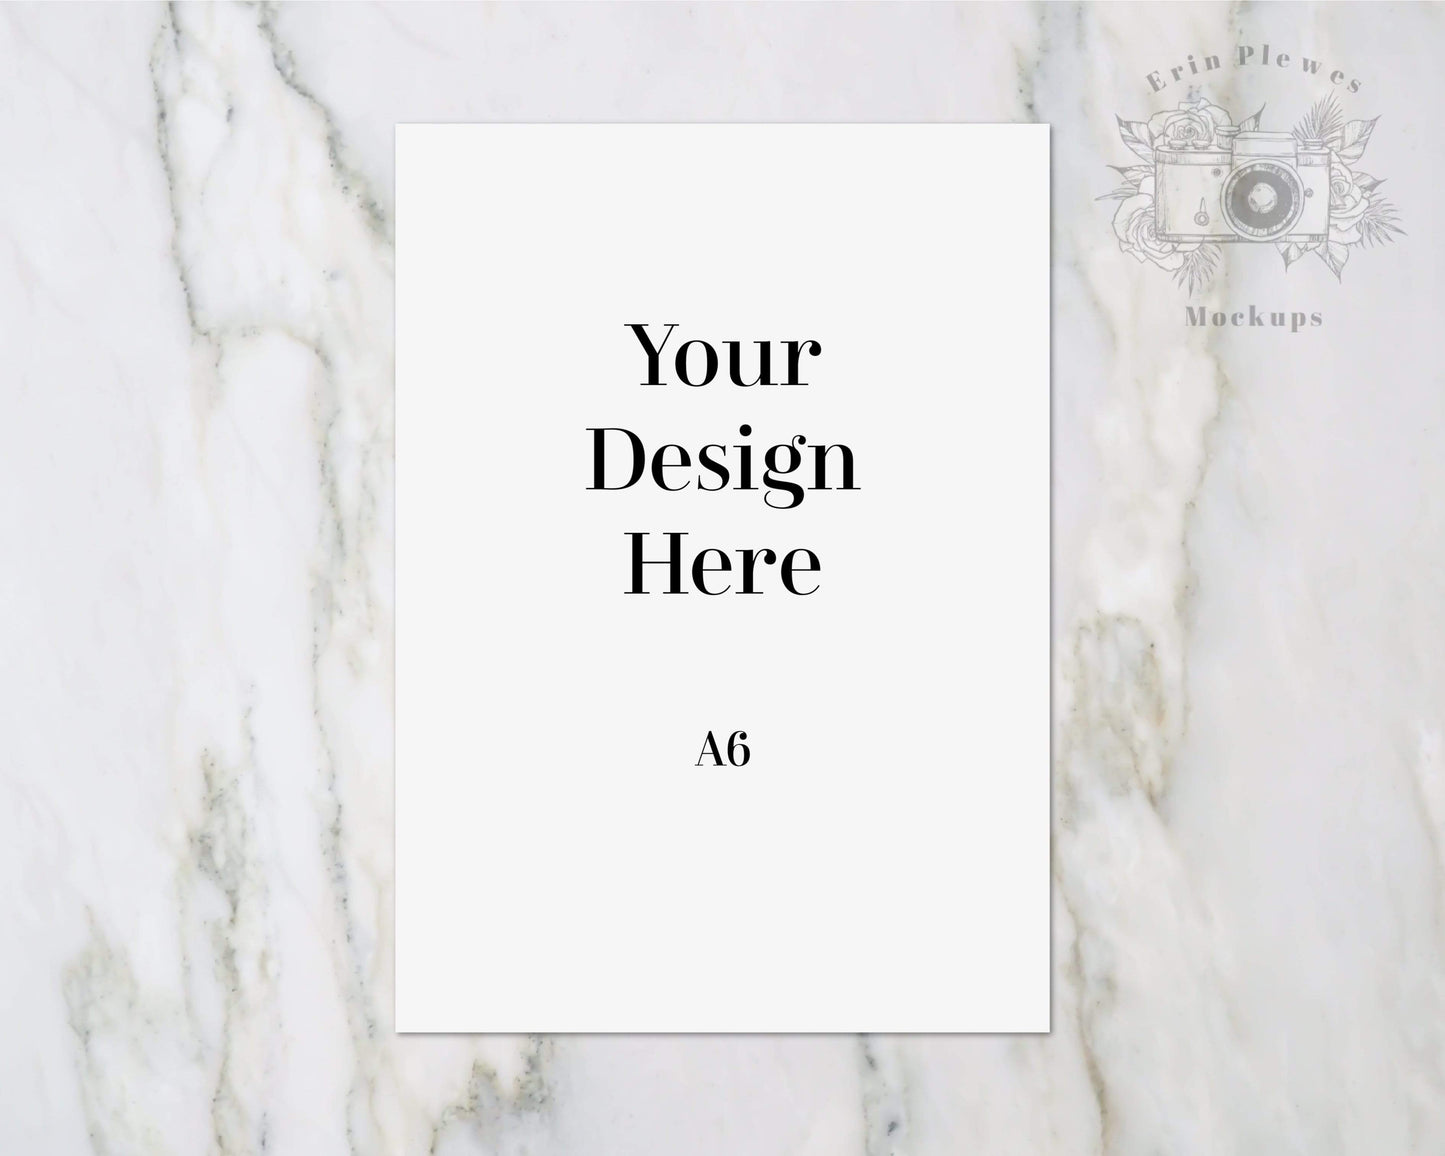 Erin Plewes Mockups A6 card mockup, Card mock-up for classic wedding thank you note on marble, Jpeg Instant Digital Download Template